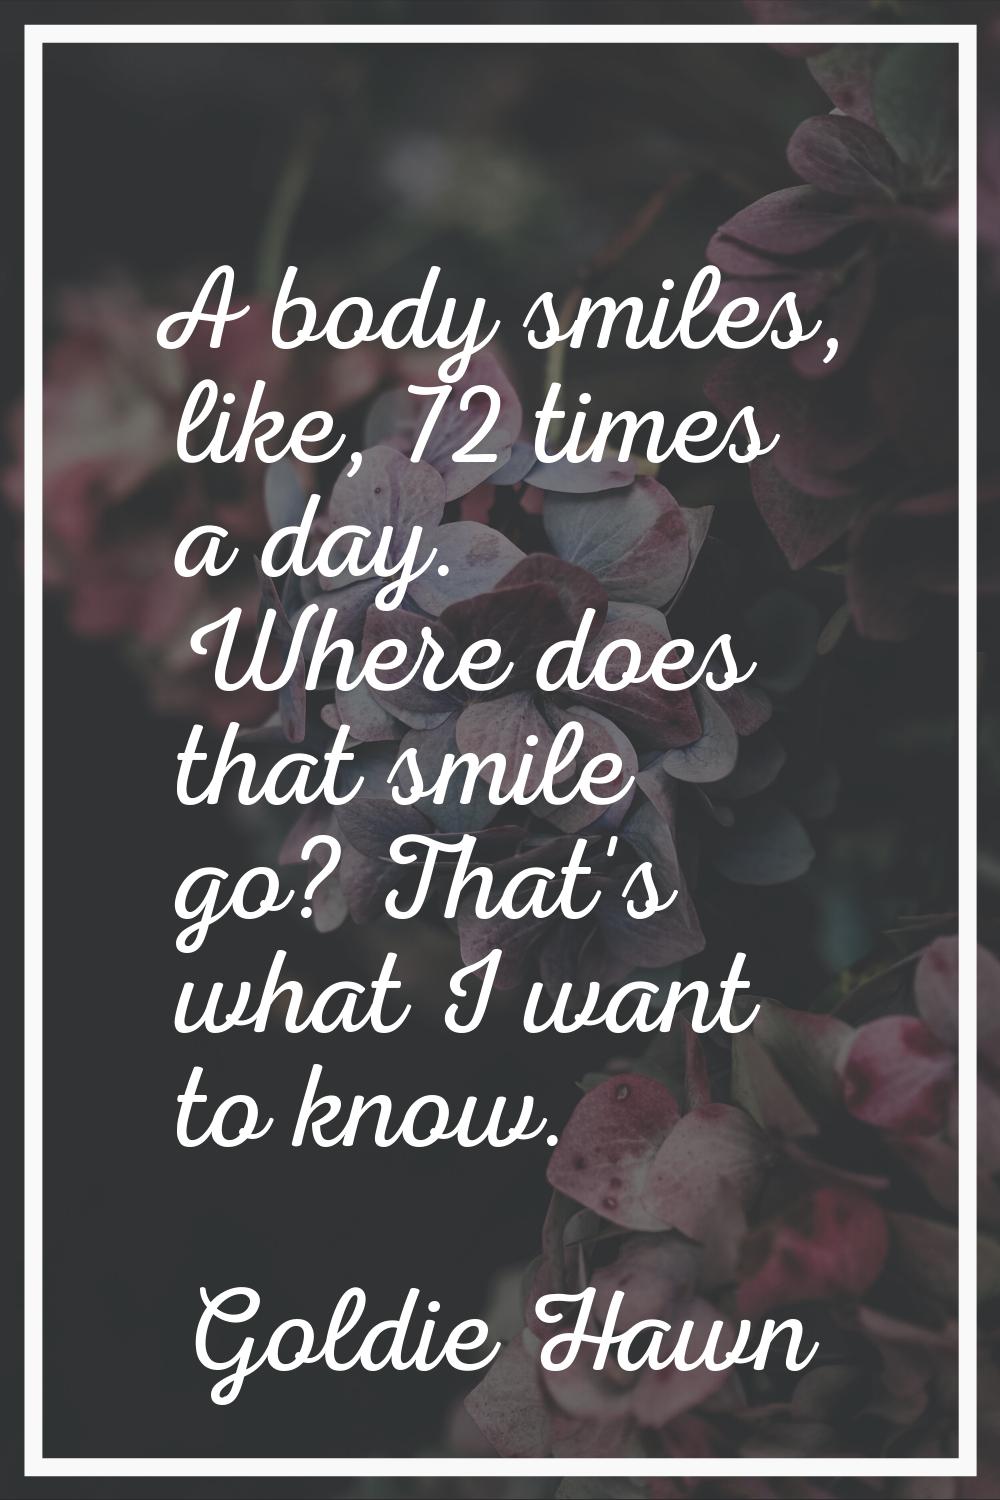 A body smiles, like, 72 times a day. Where does that smile go? That's what I want to know.